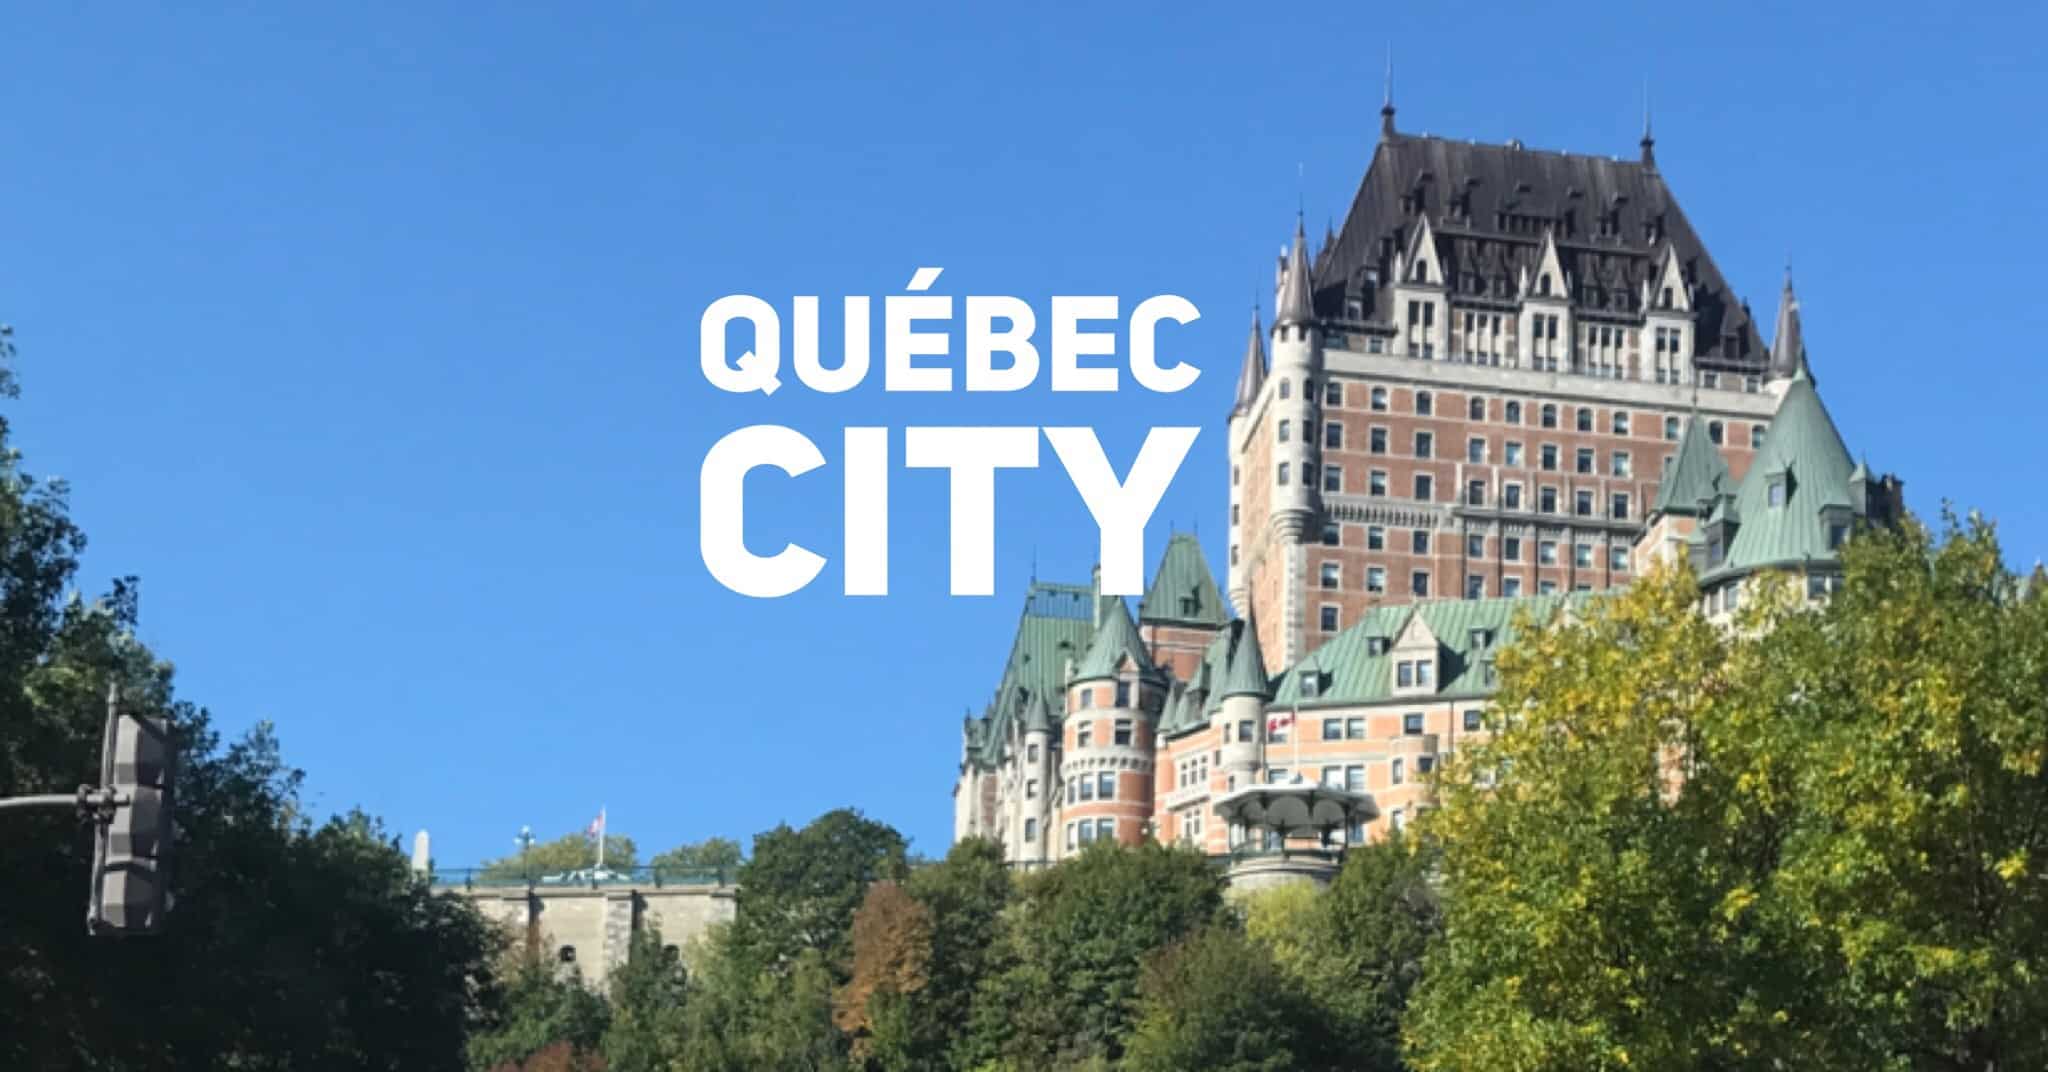 Quebec City Porn - Best Museums and Notes in QuÃ©bec City, Canada